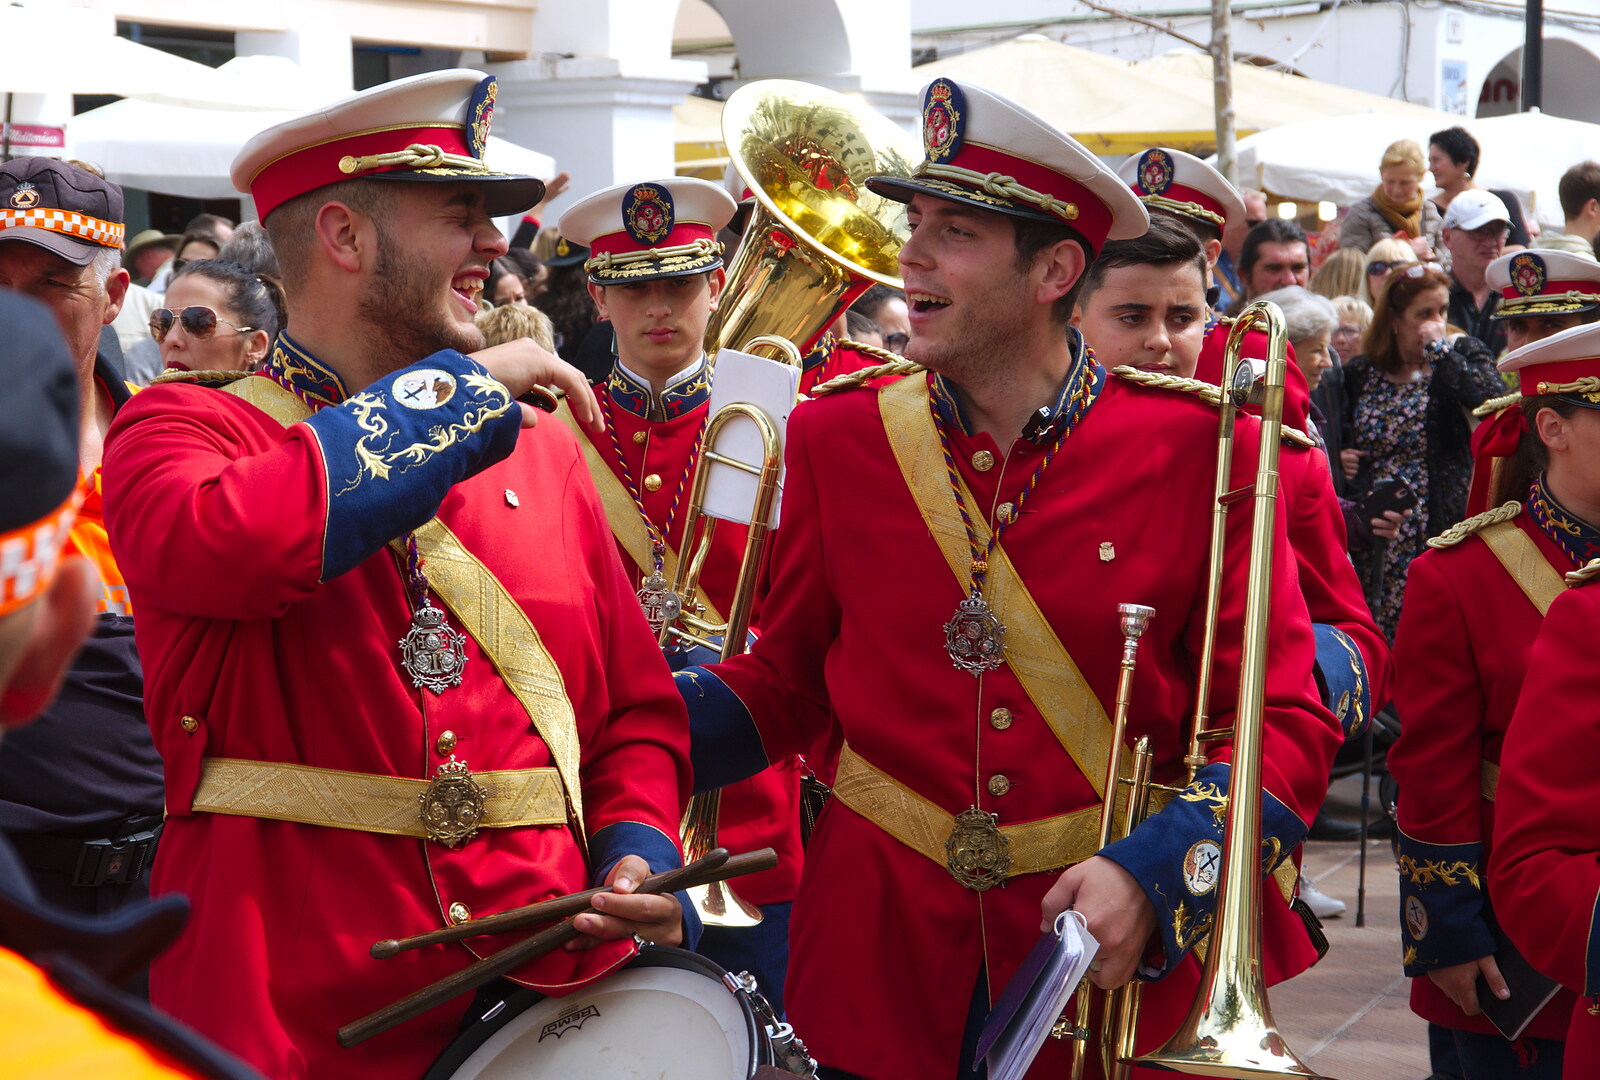 A joke is shared in the band from An Easter Parade, Nerja, Andalusia, Spain - 21st April 2019